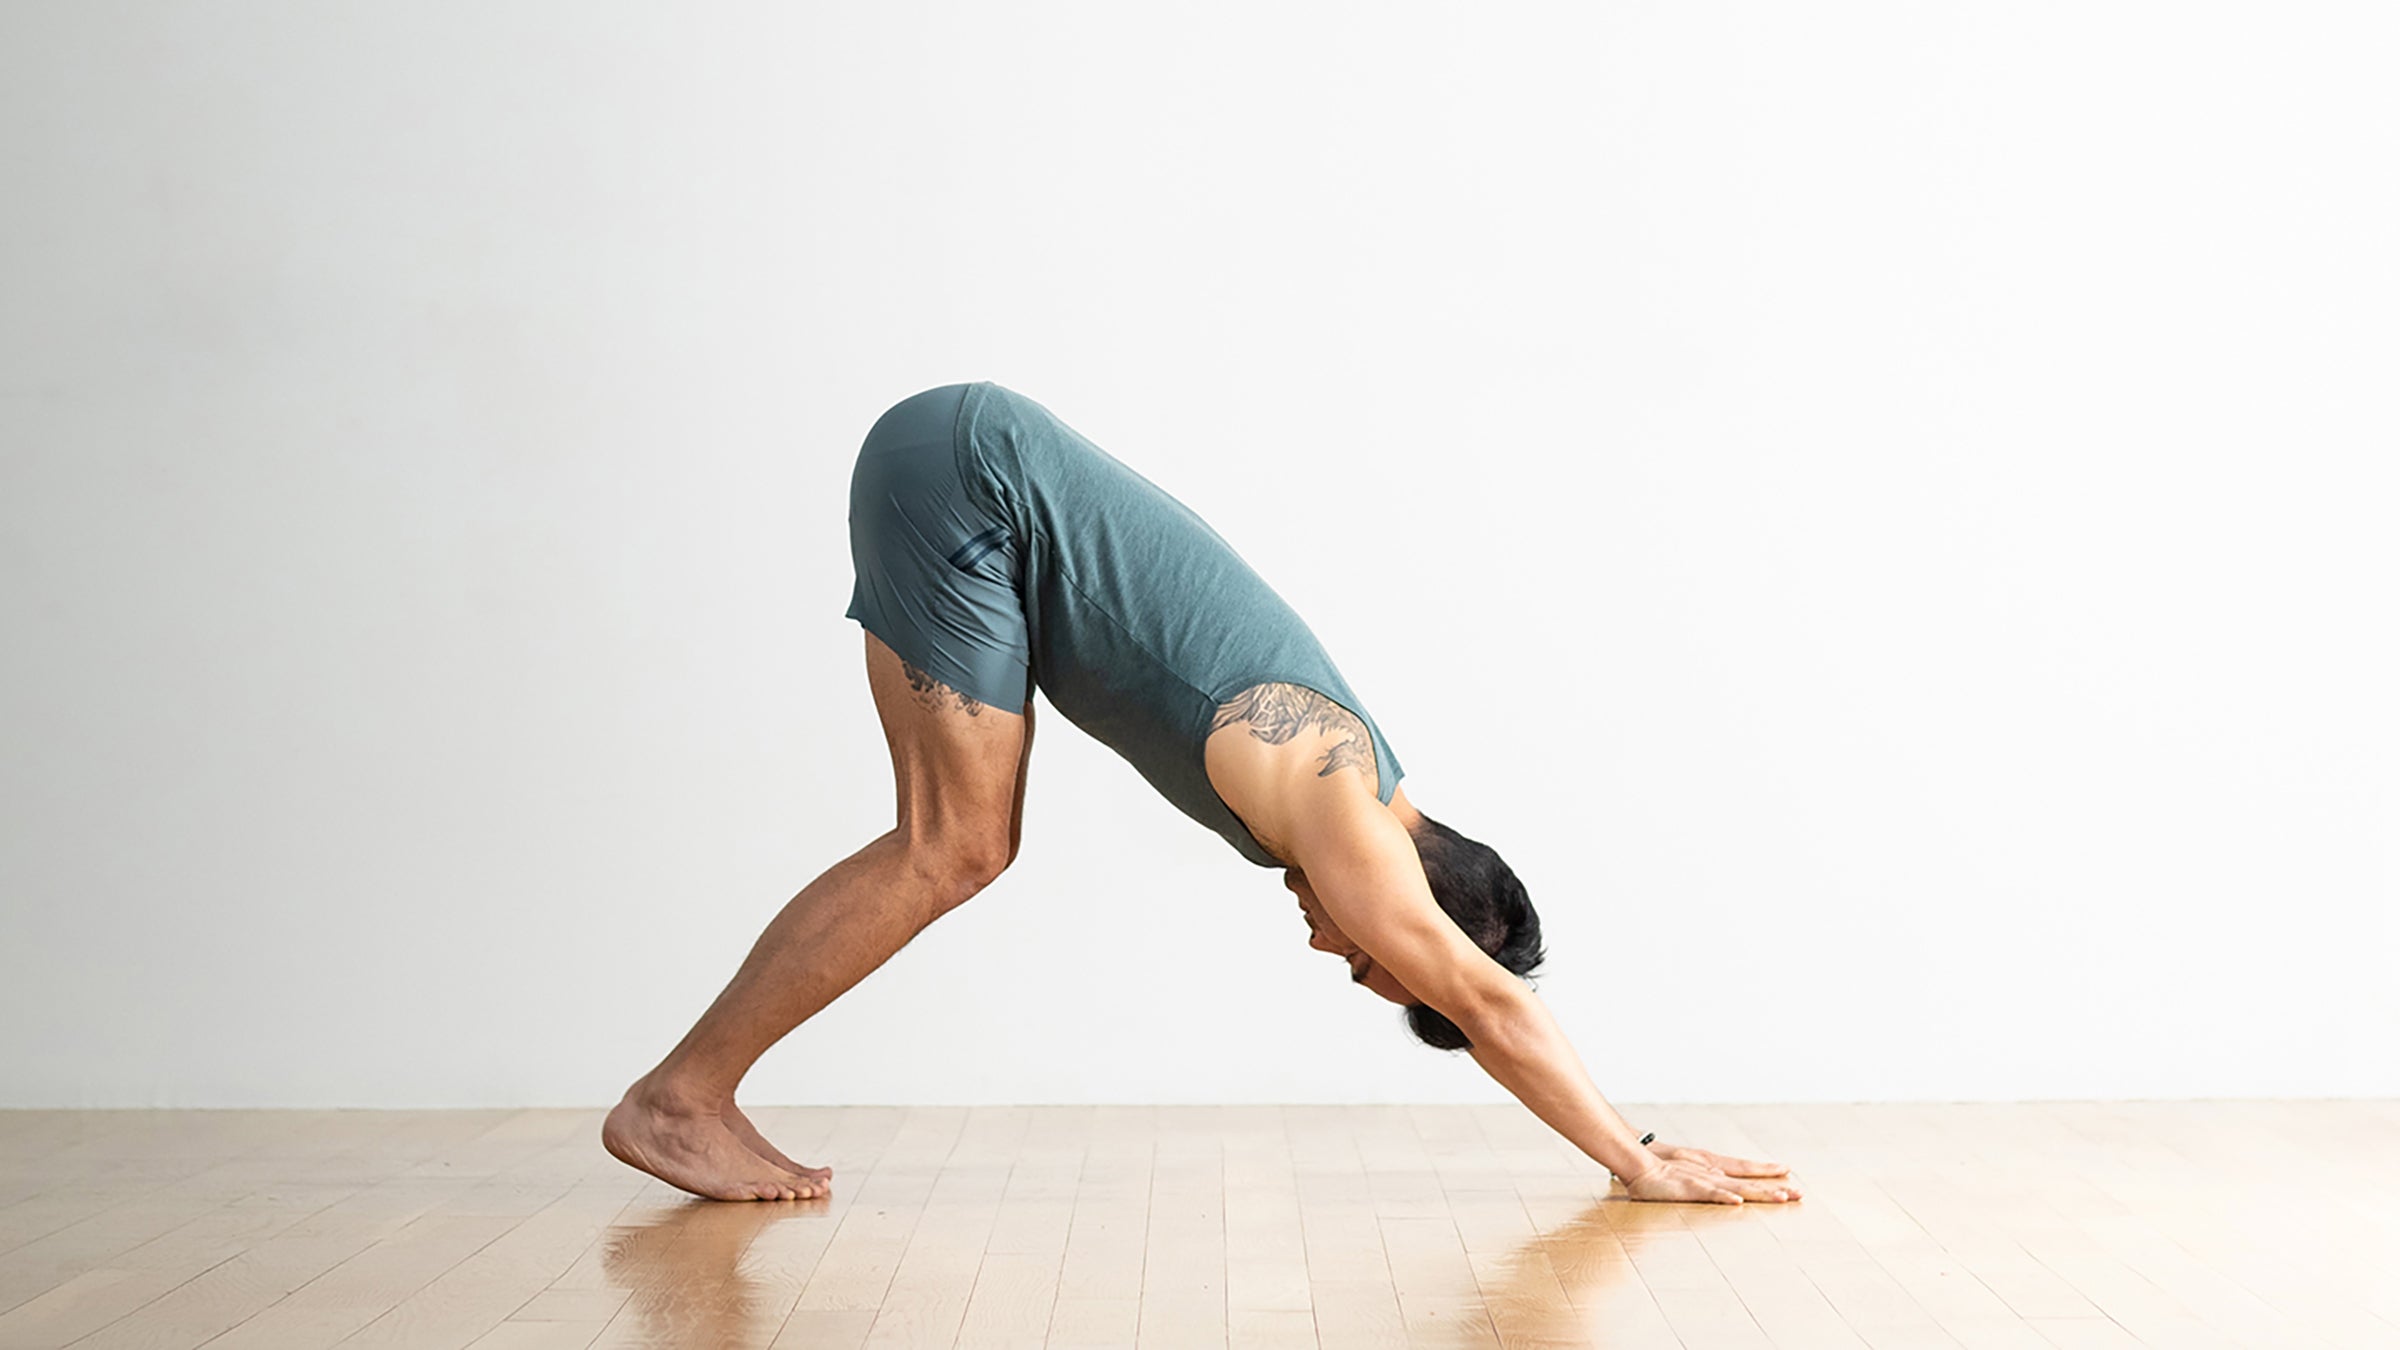 3 Yoga poses to challenge your balance | Gallery posted by Melanie | Lemon8